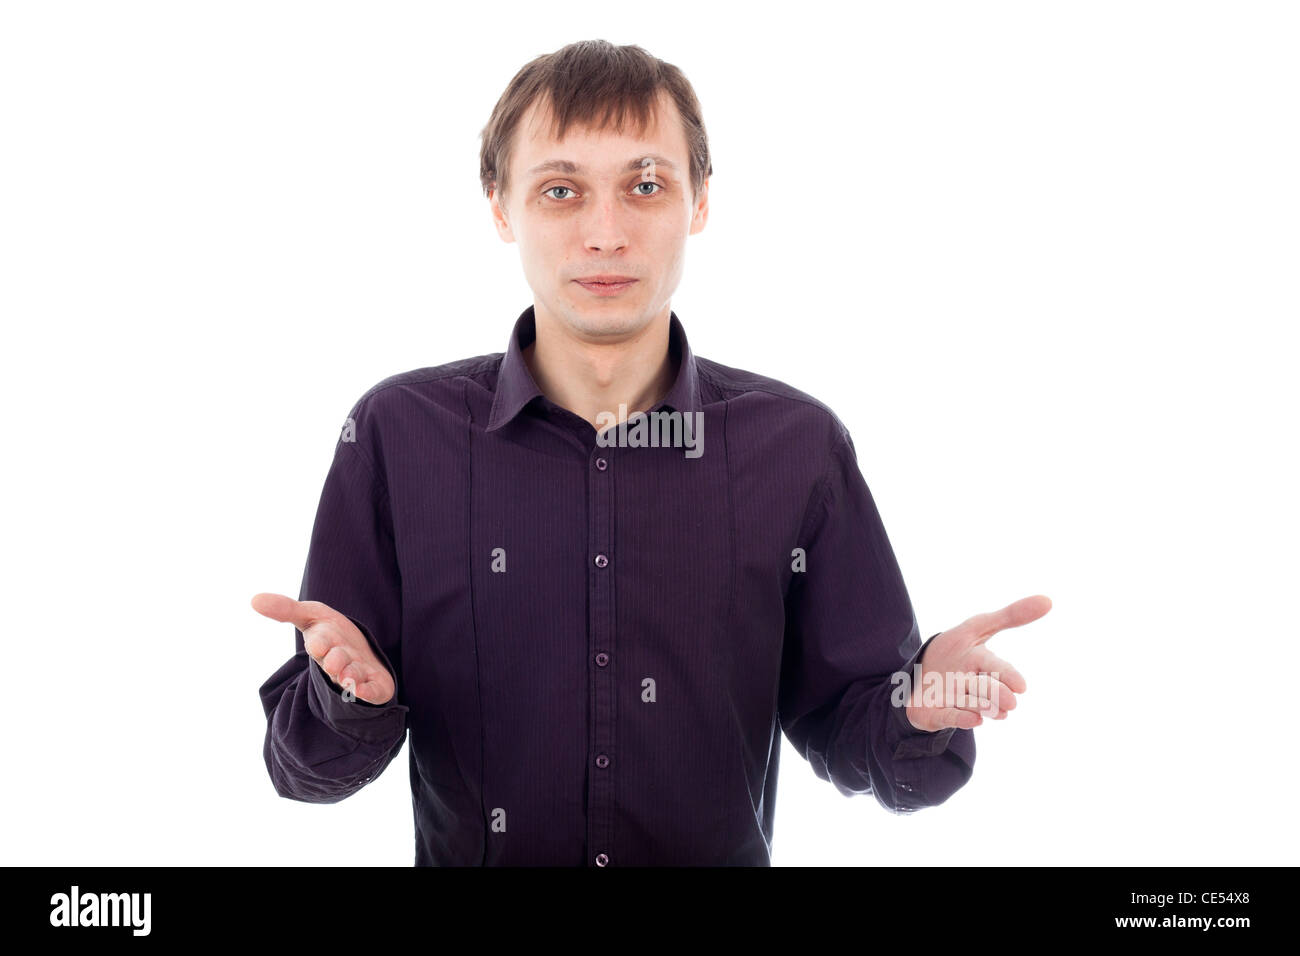 Funny confused nerd man, isolated on white background. Stock Photo